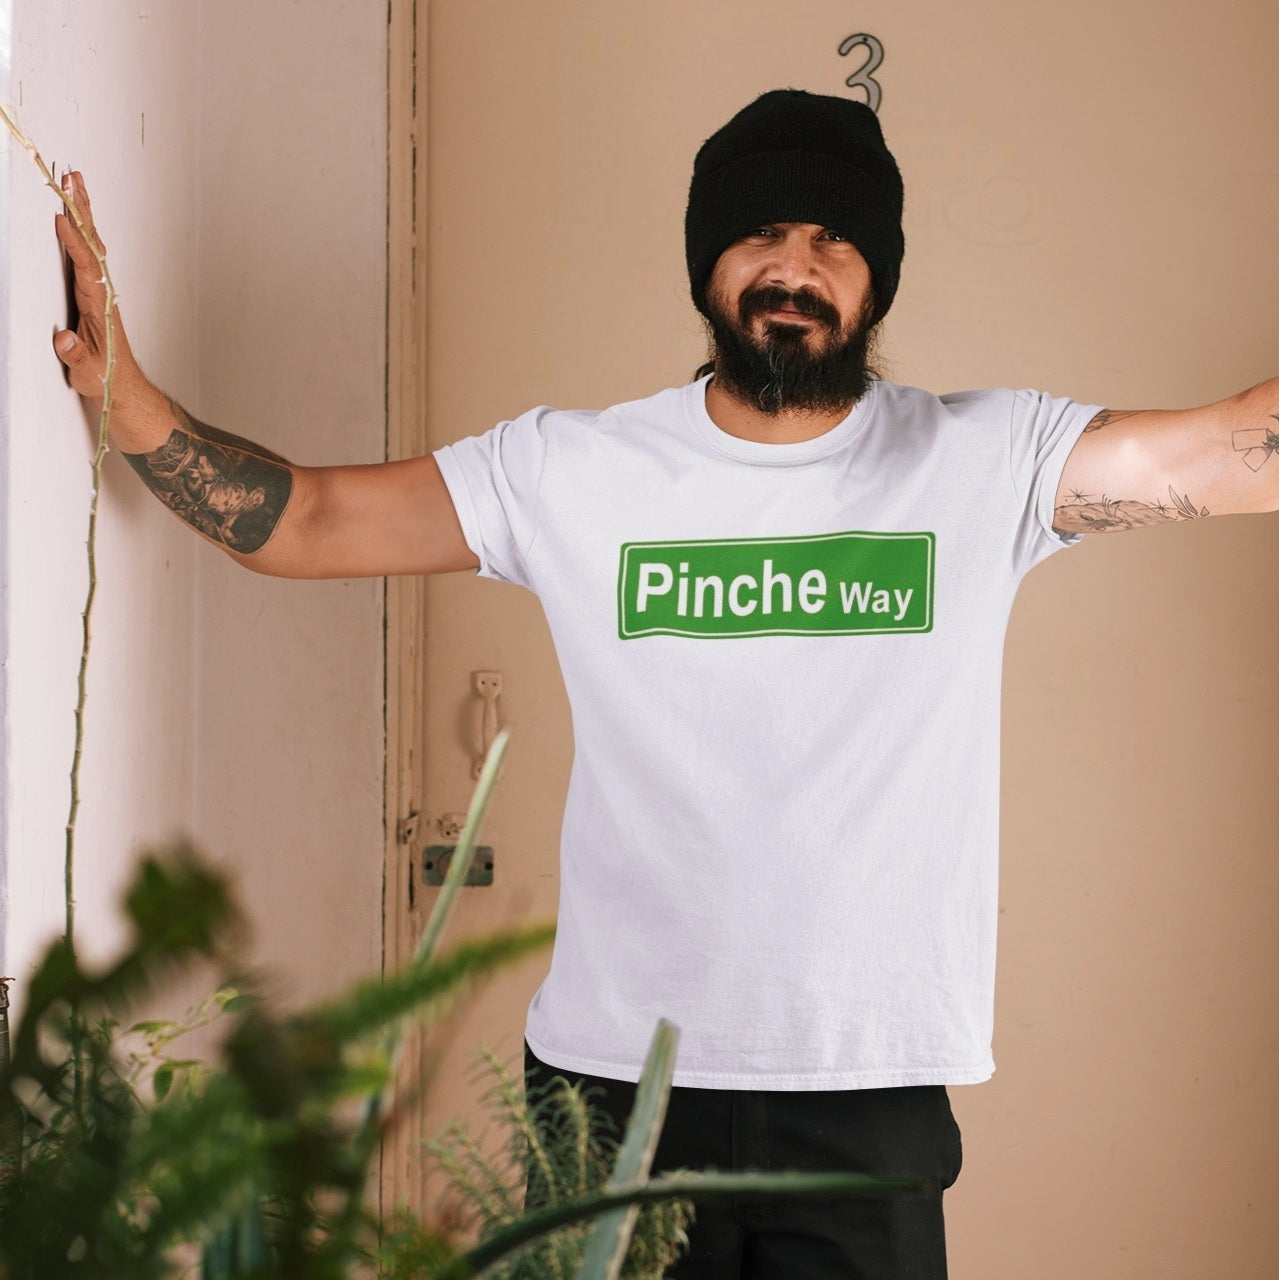 mexican man wearing a T-shirt showcasing a funny green street sign graphic with the words 'Pinche Way'